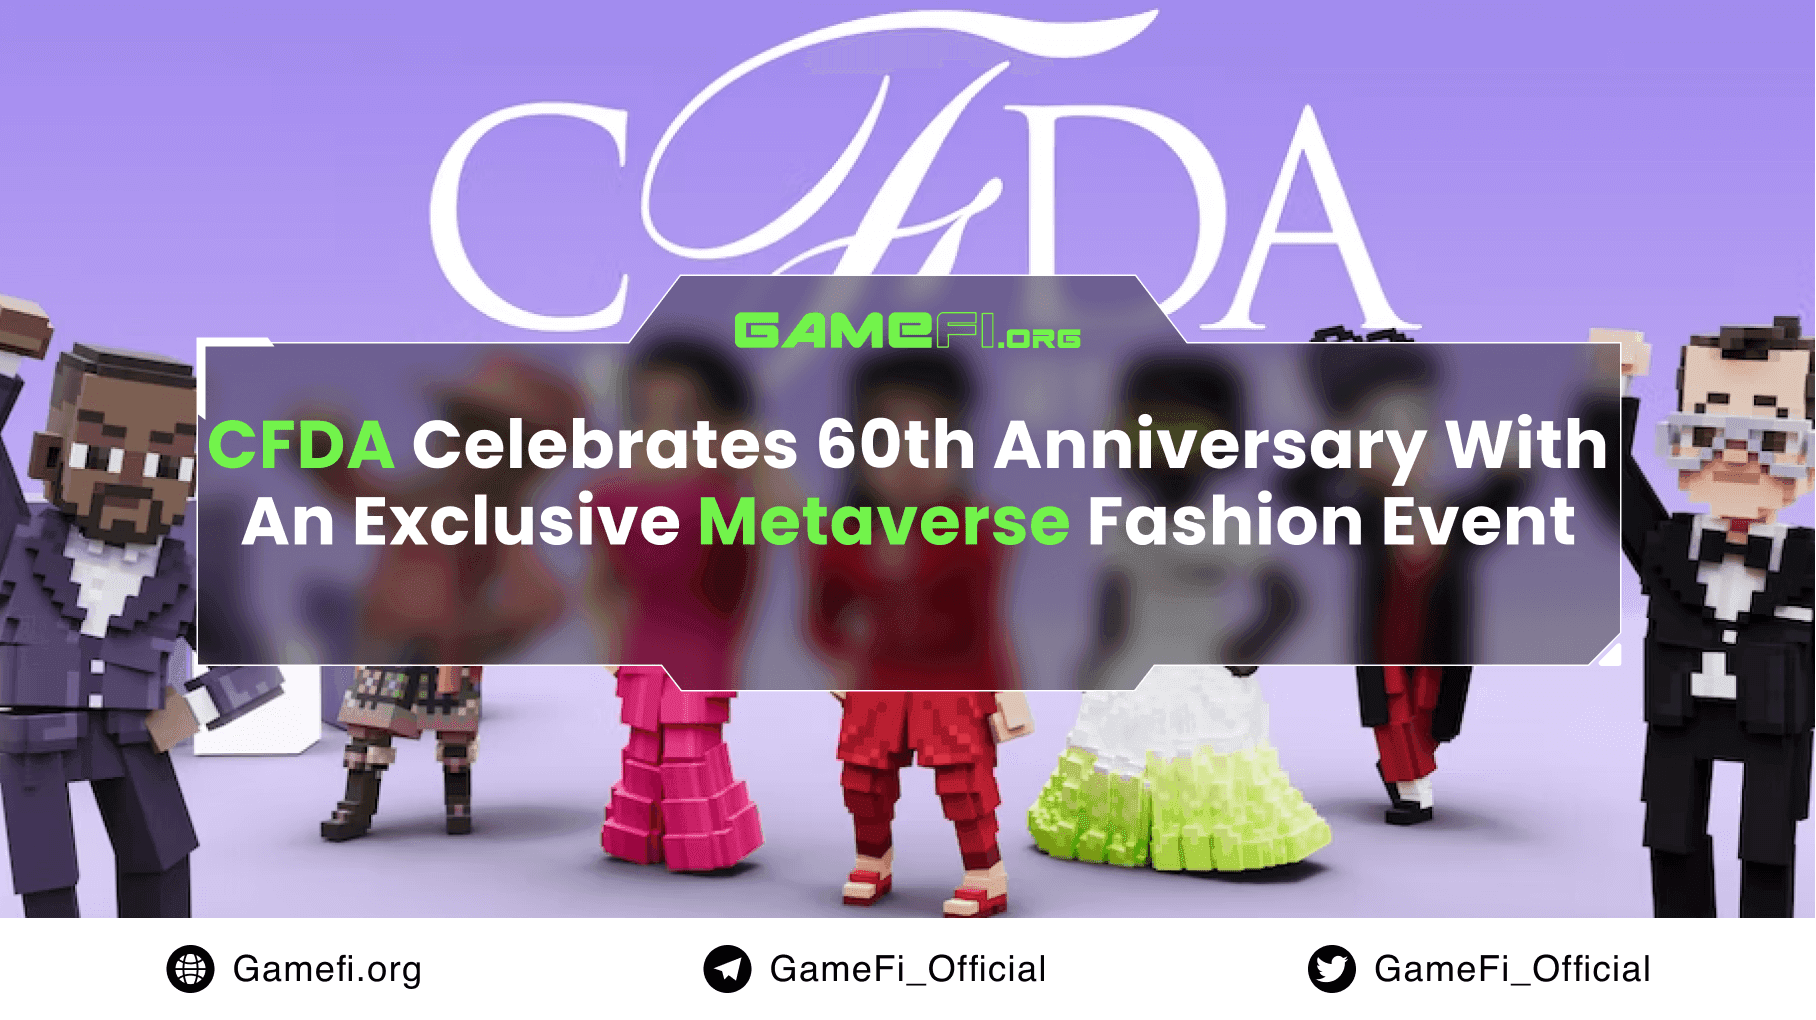 CFDA Celebrates 60th Anniversary with an Exclusive Metaverse Fashion Event